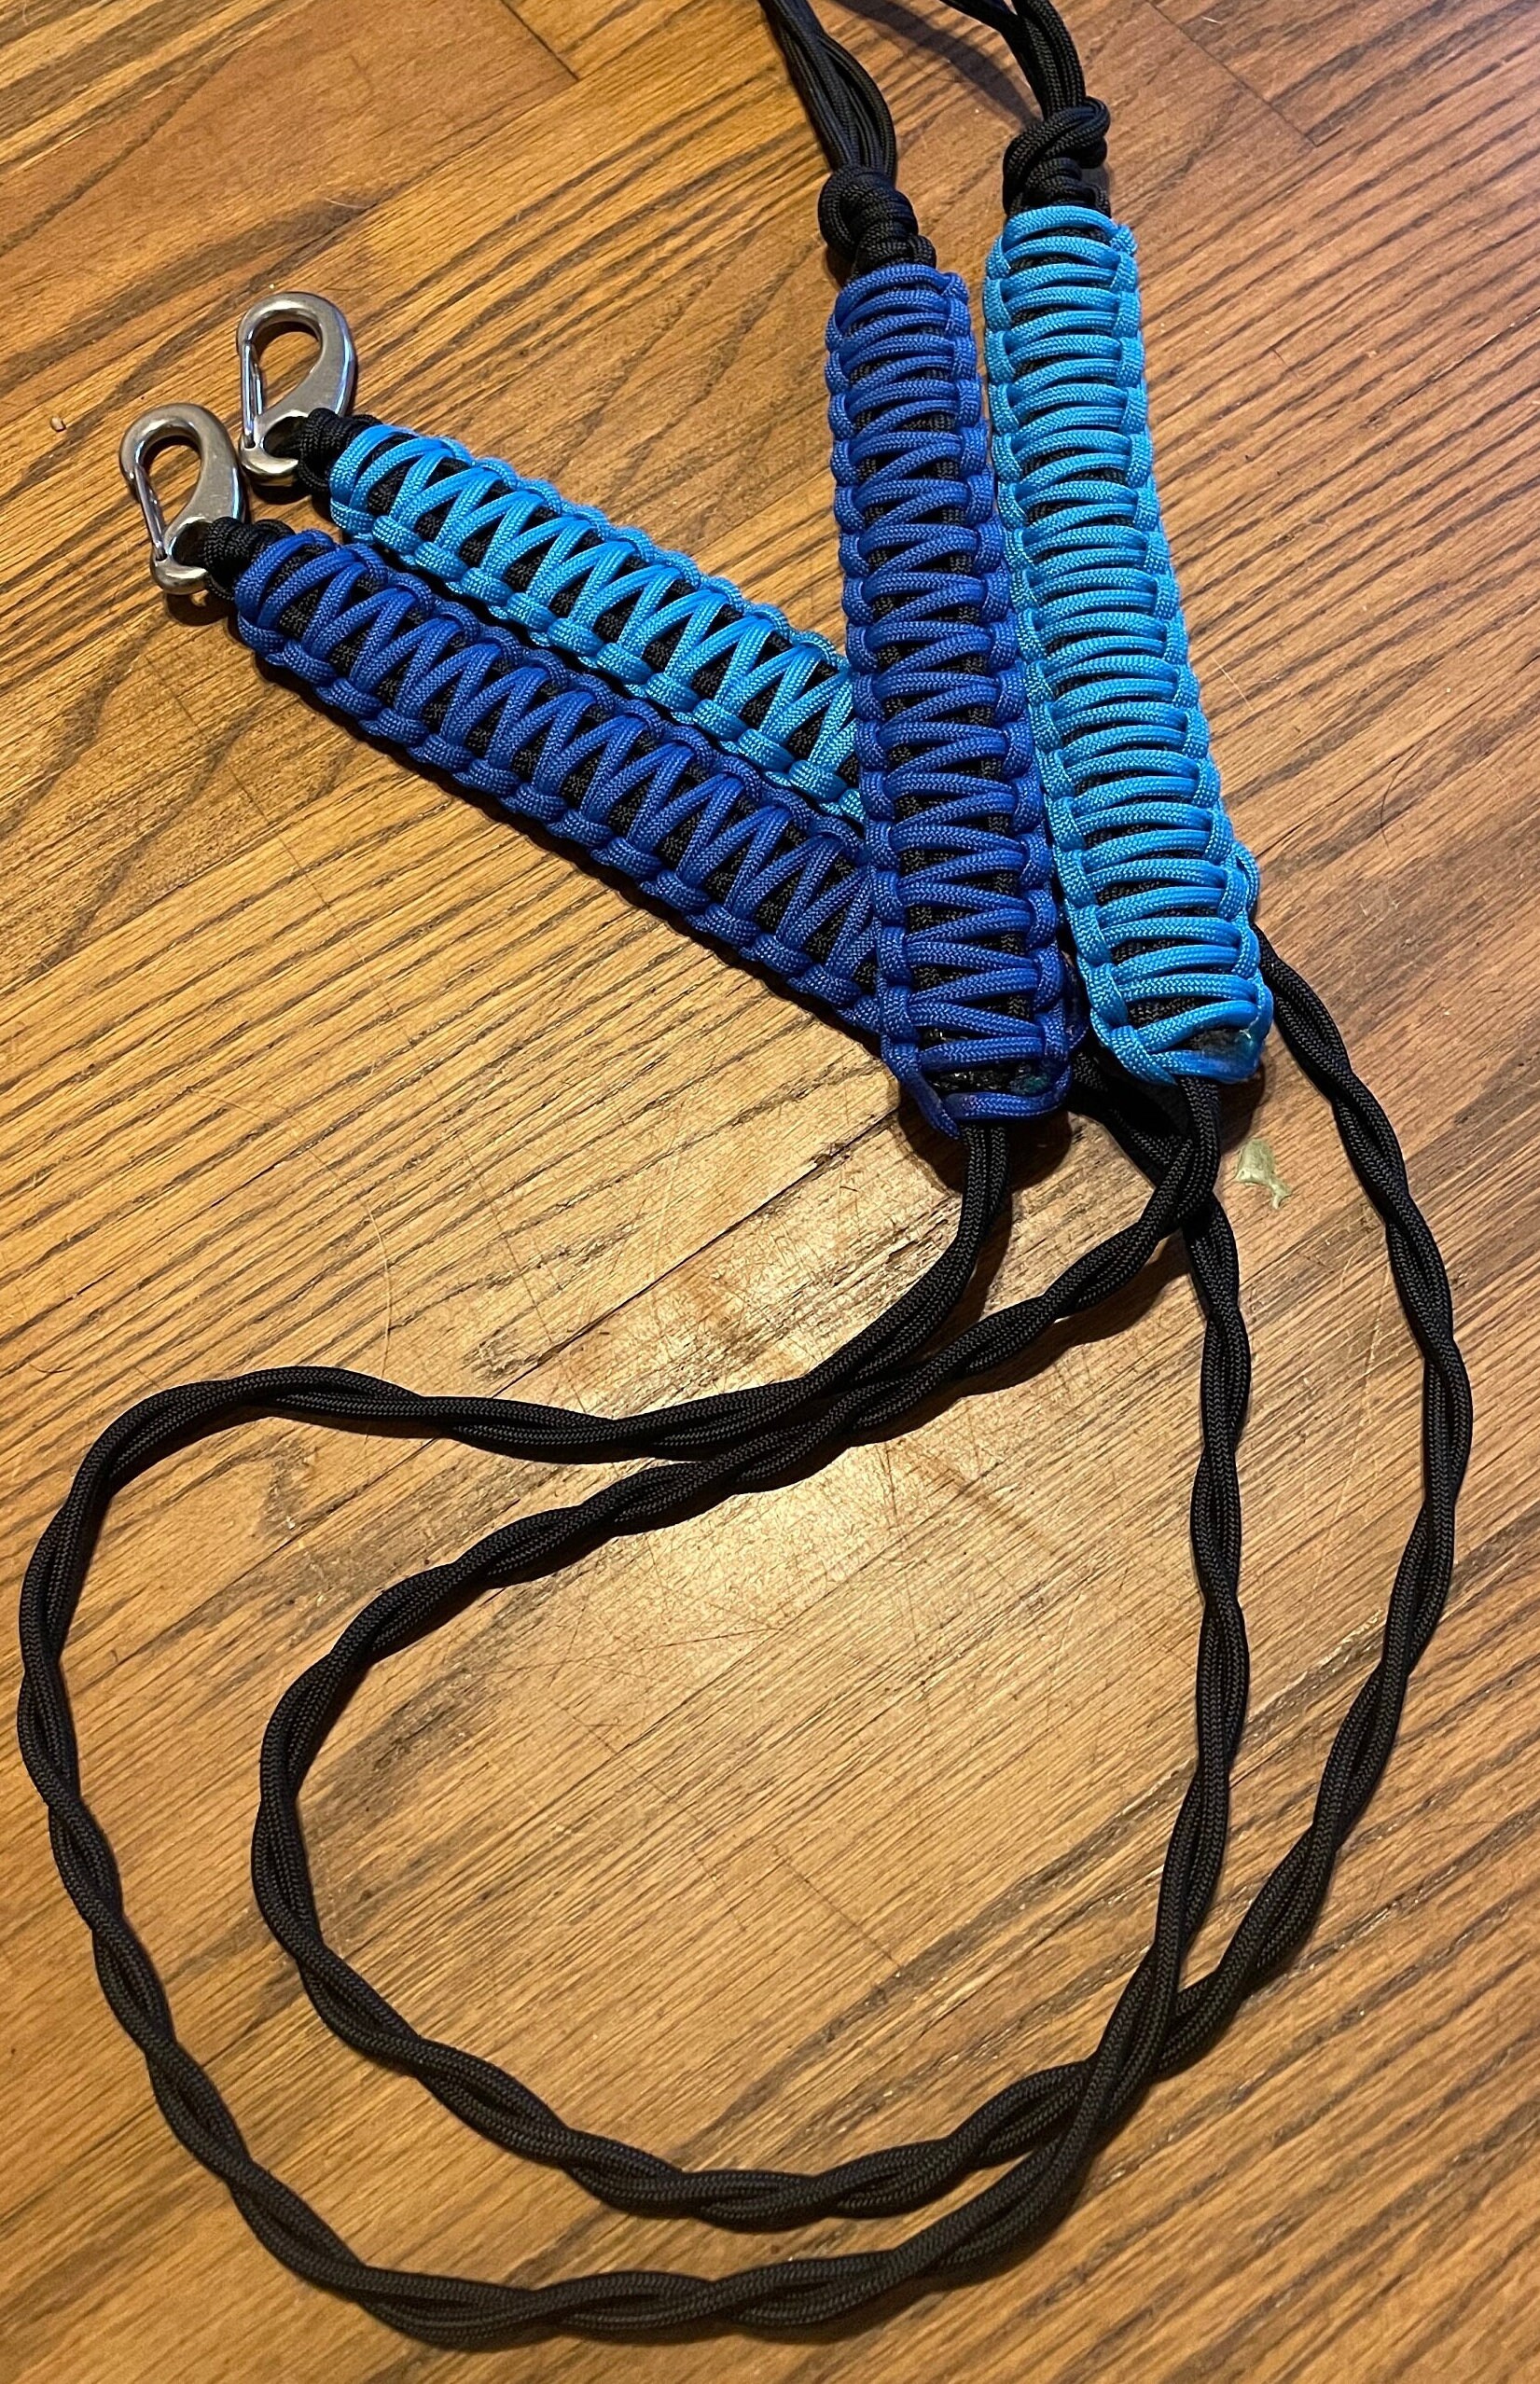 Rod and Reel Leash-1100 Lb Tensile-custom to Order 2 to 8 Ft W